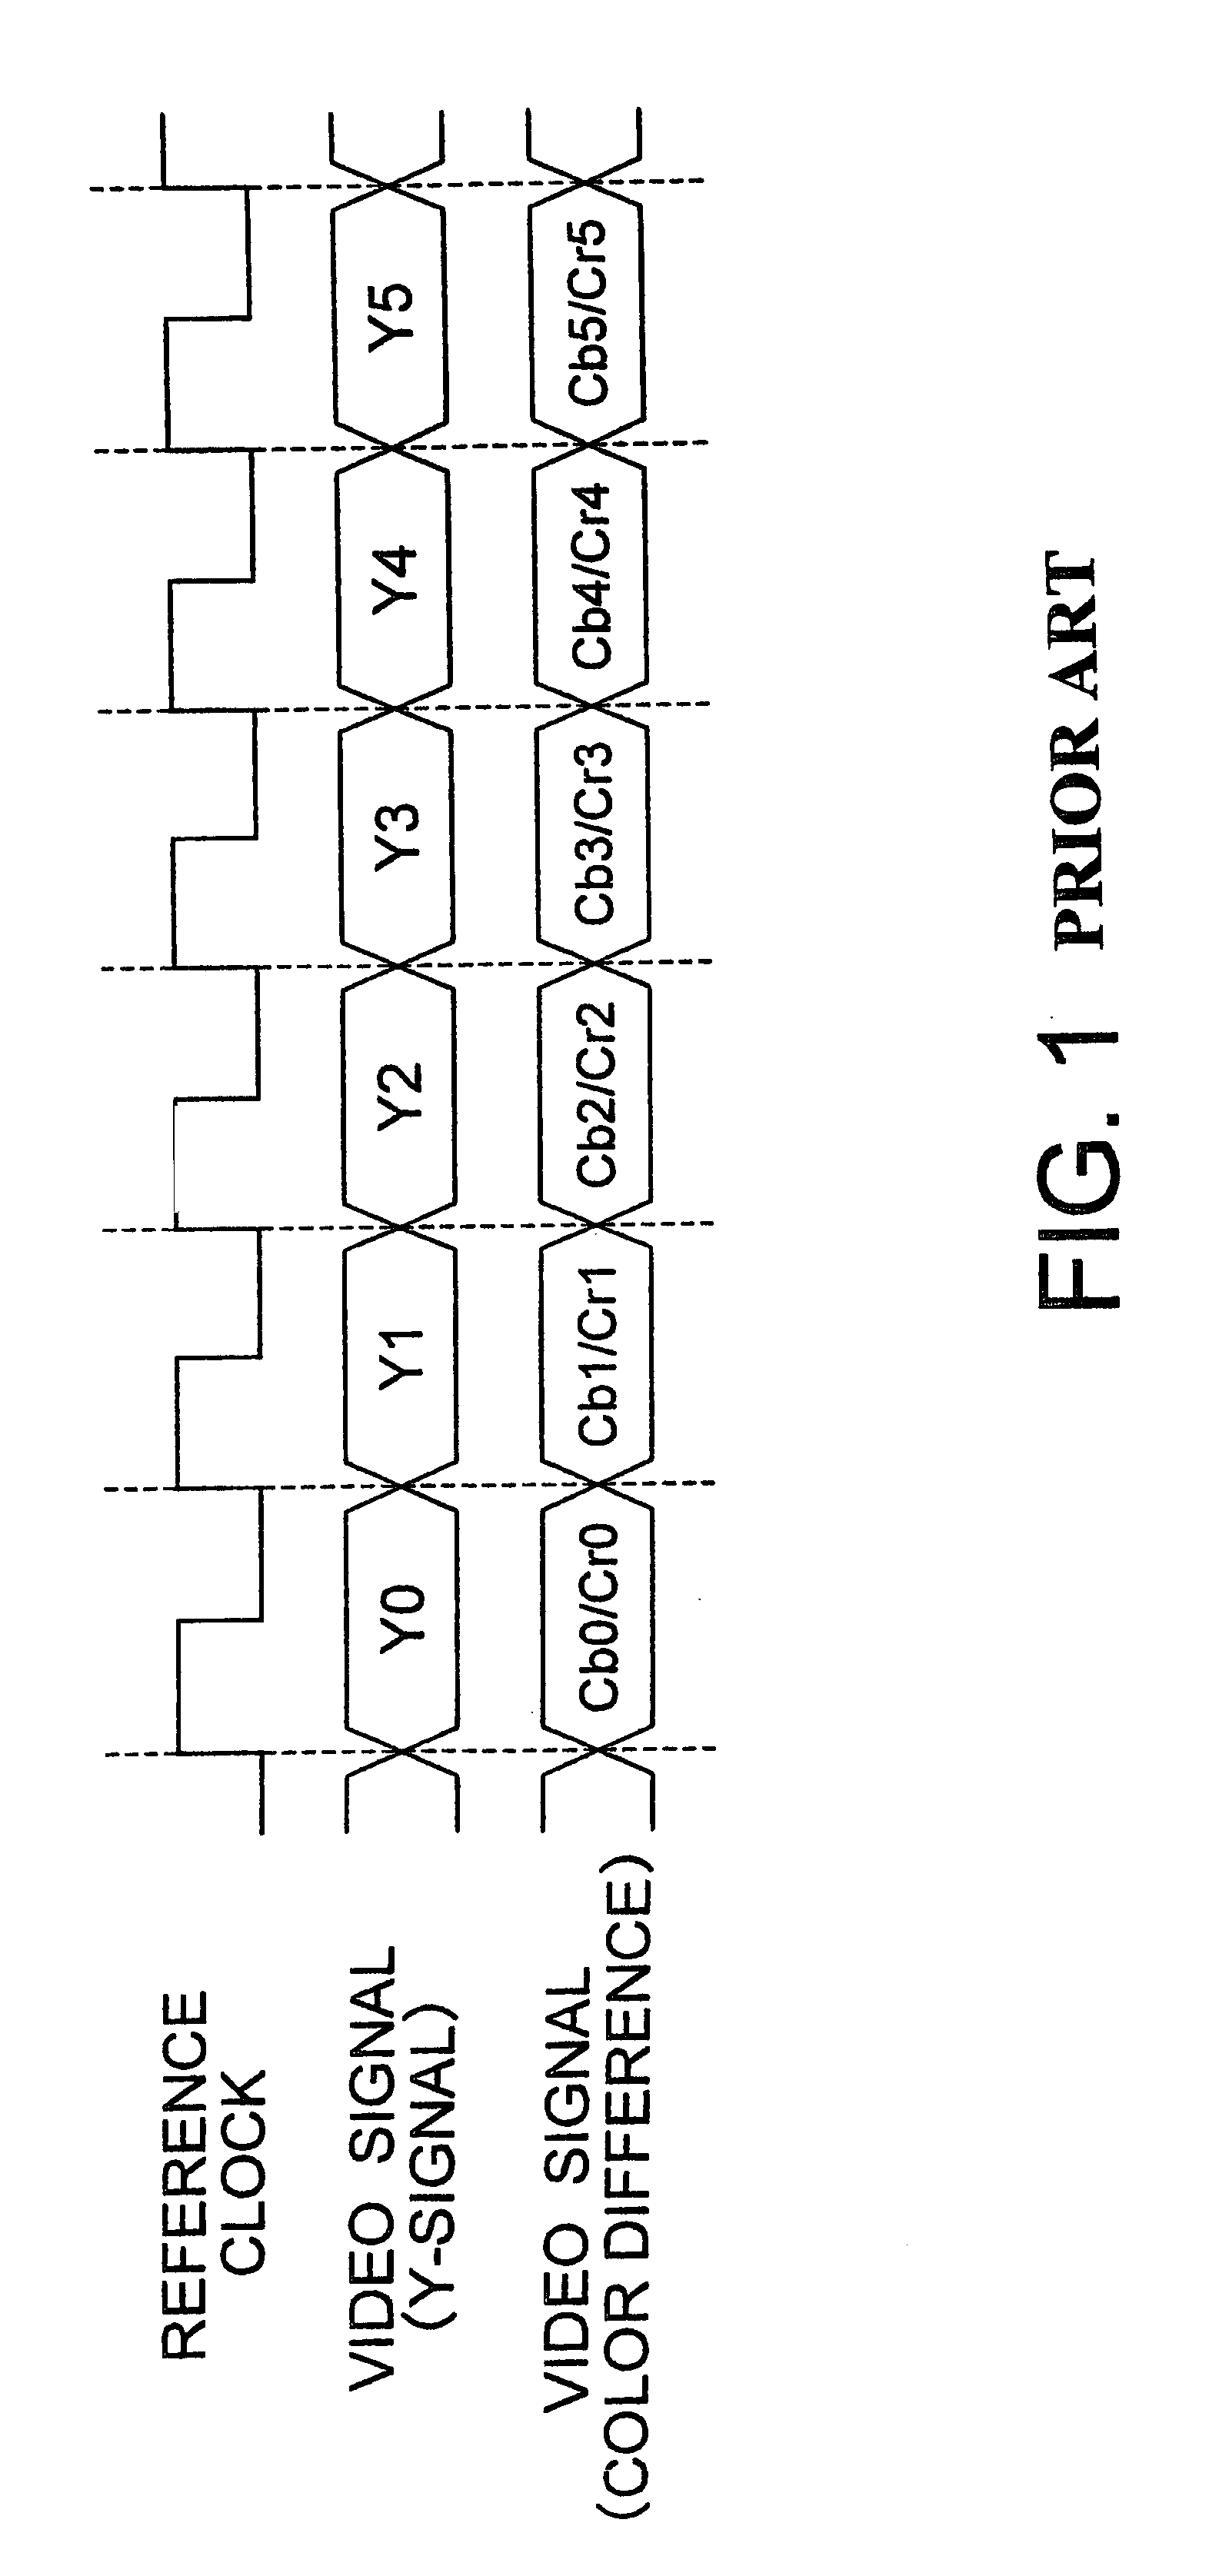 Synchronous signal processing system